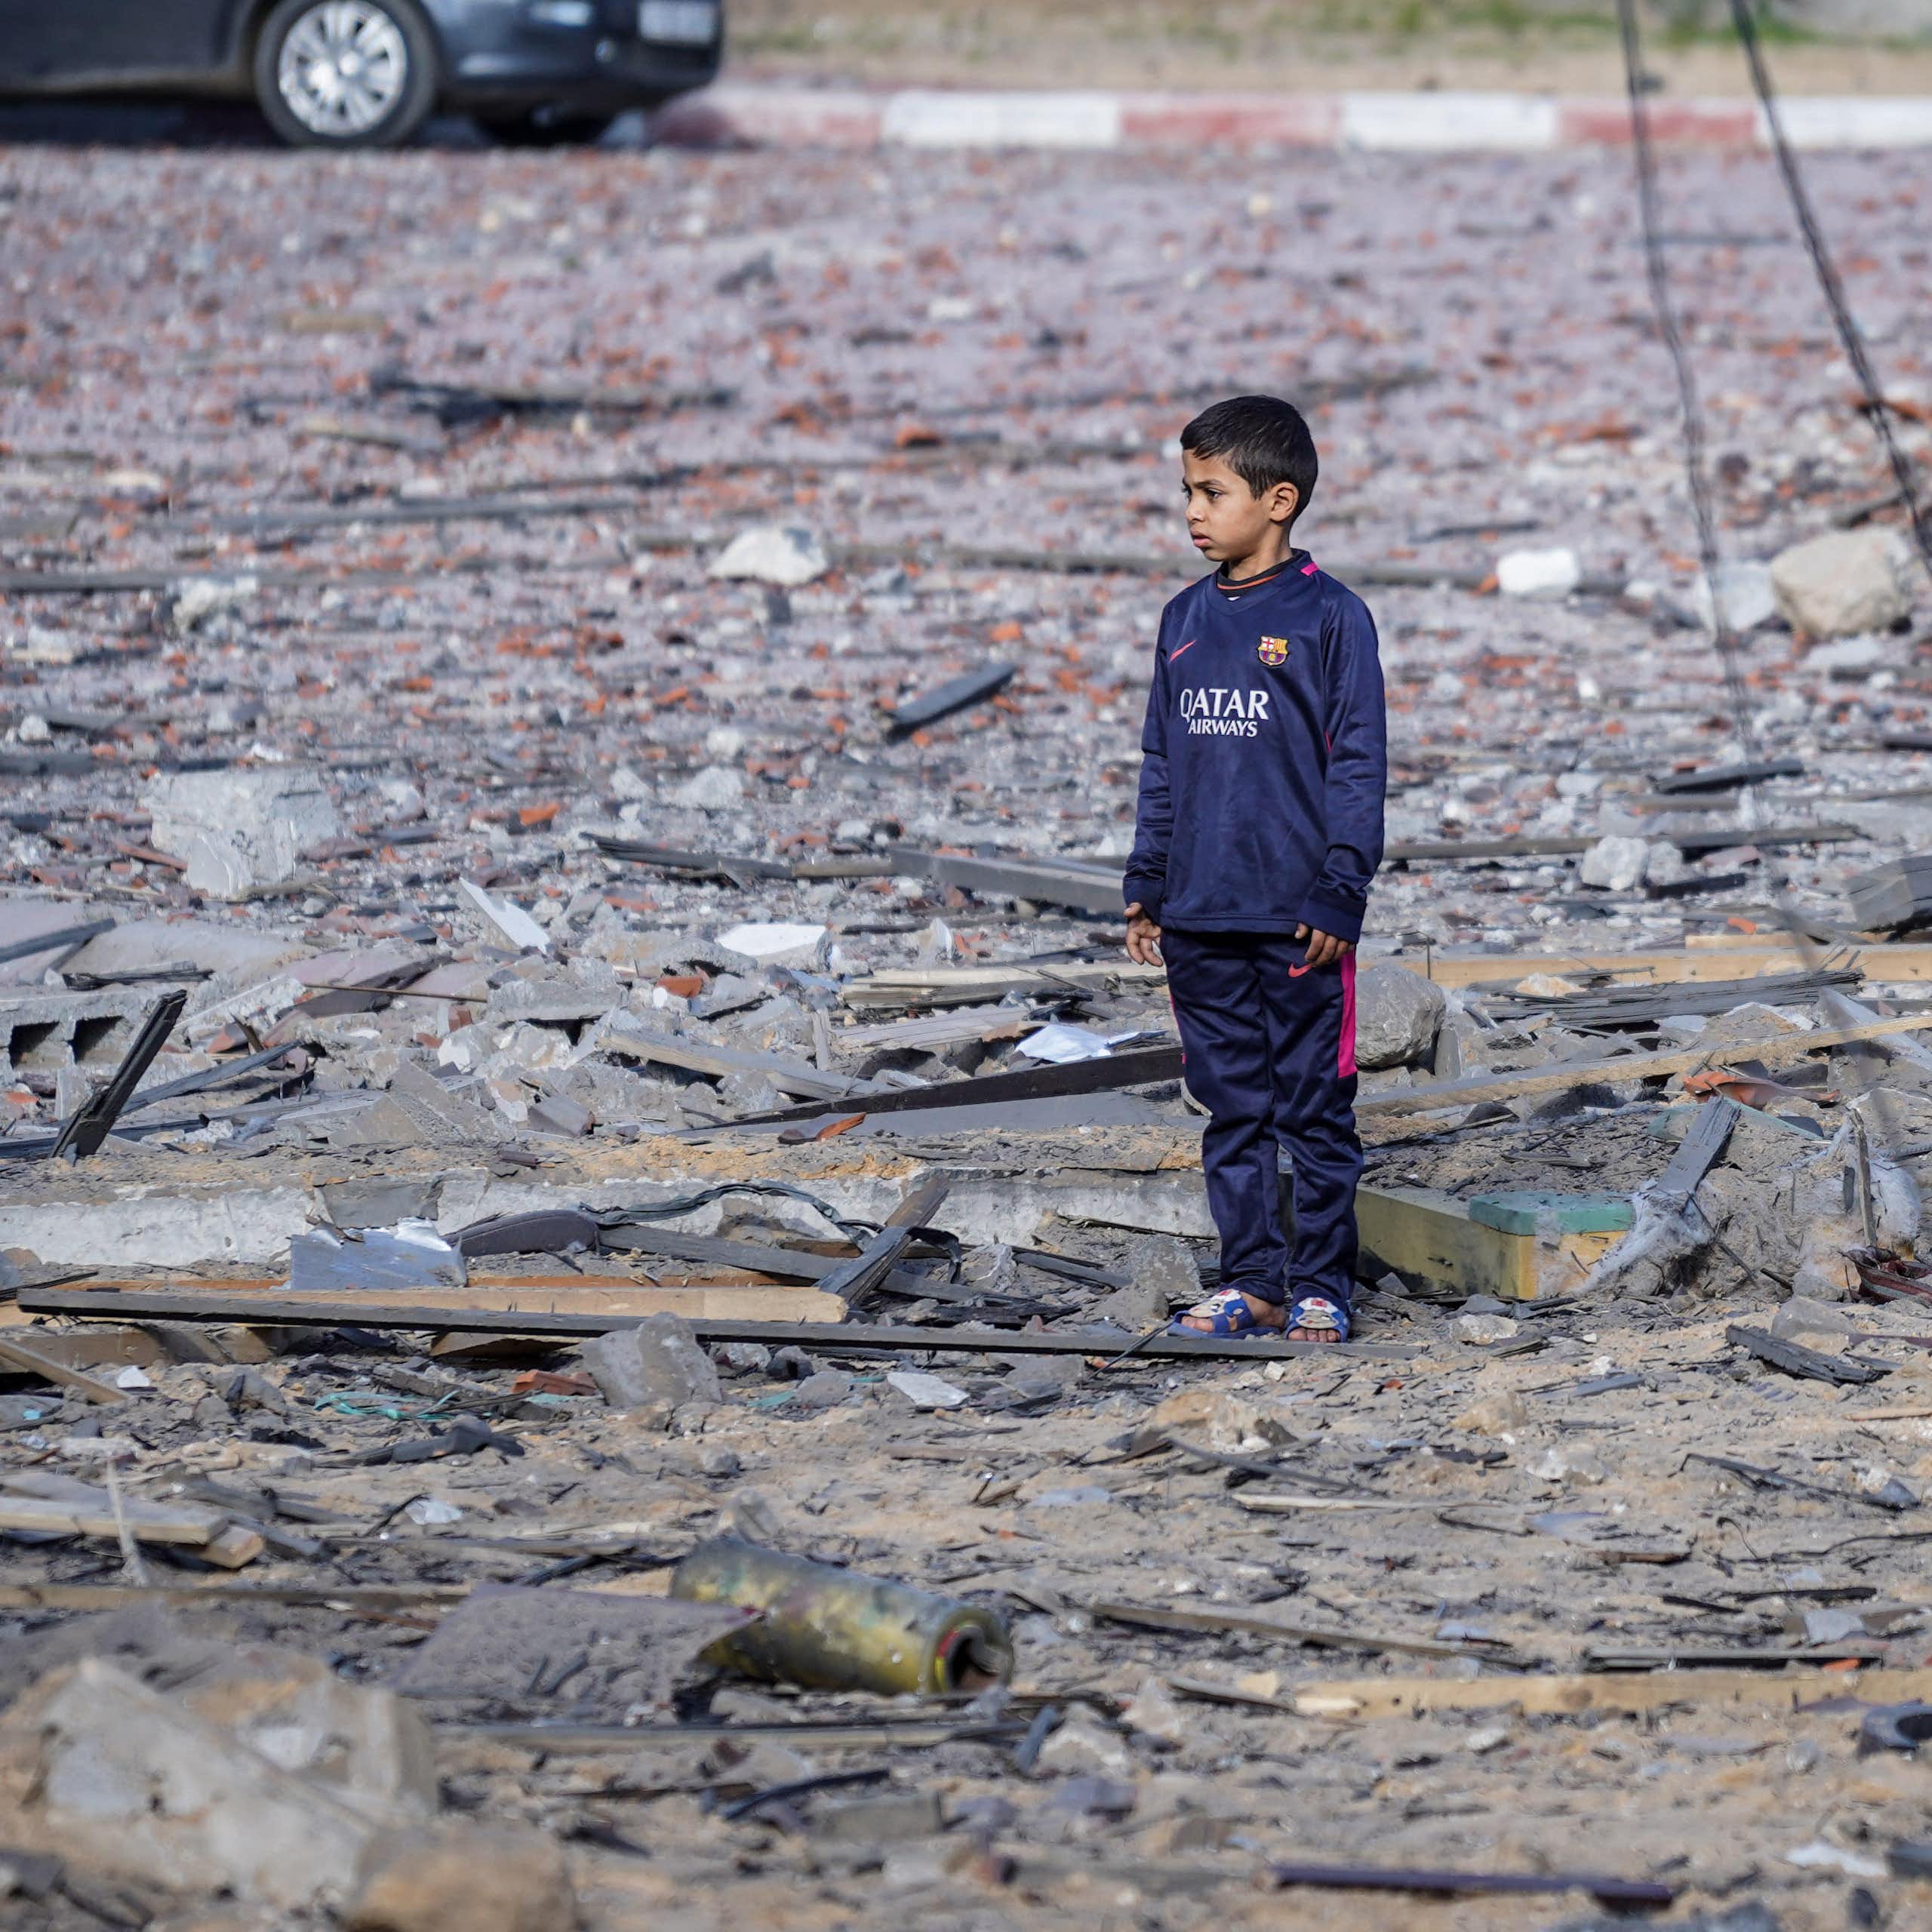 The UN has a ‘list of shame’ for those who harm children in war – but who is missing?